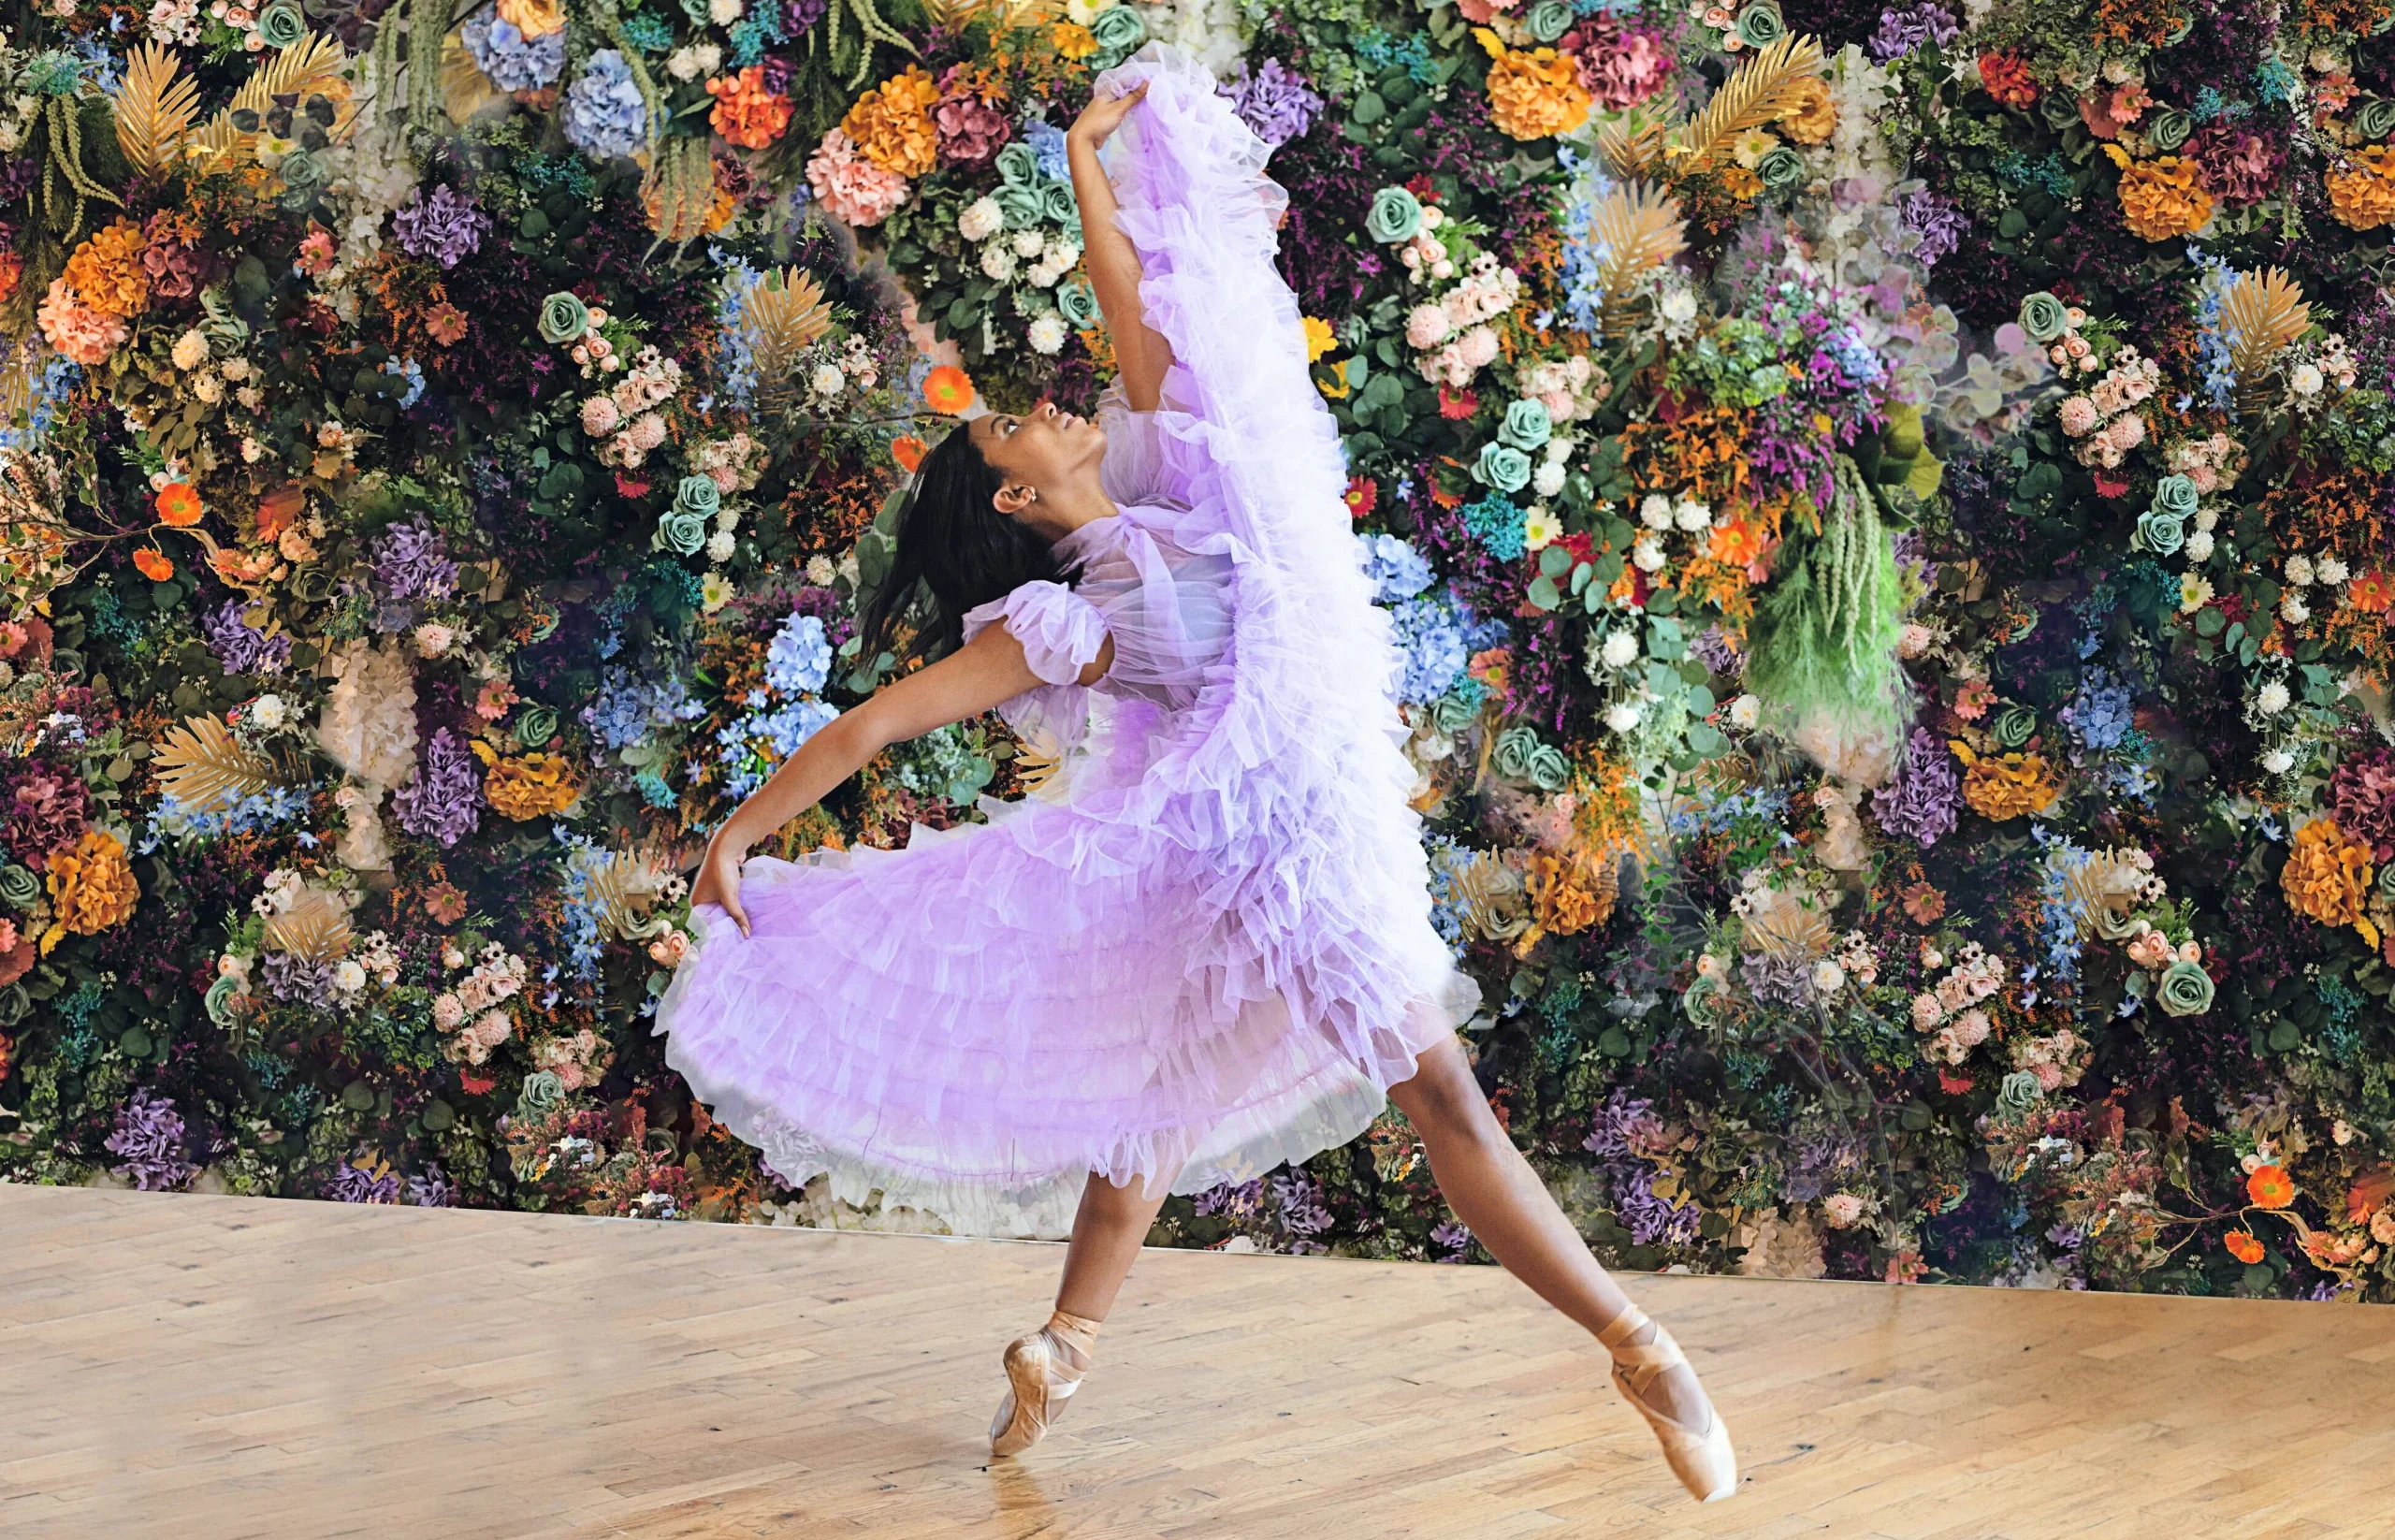 In front of a colorful floral backdrop, a young Black dancer poses for a photo wearing a long, ruffly light purple dress. She swishes the dress up with her hands, leaning back slightly in a controlled fall off-pointe forward.